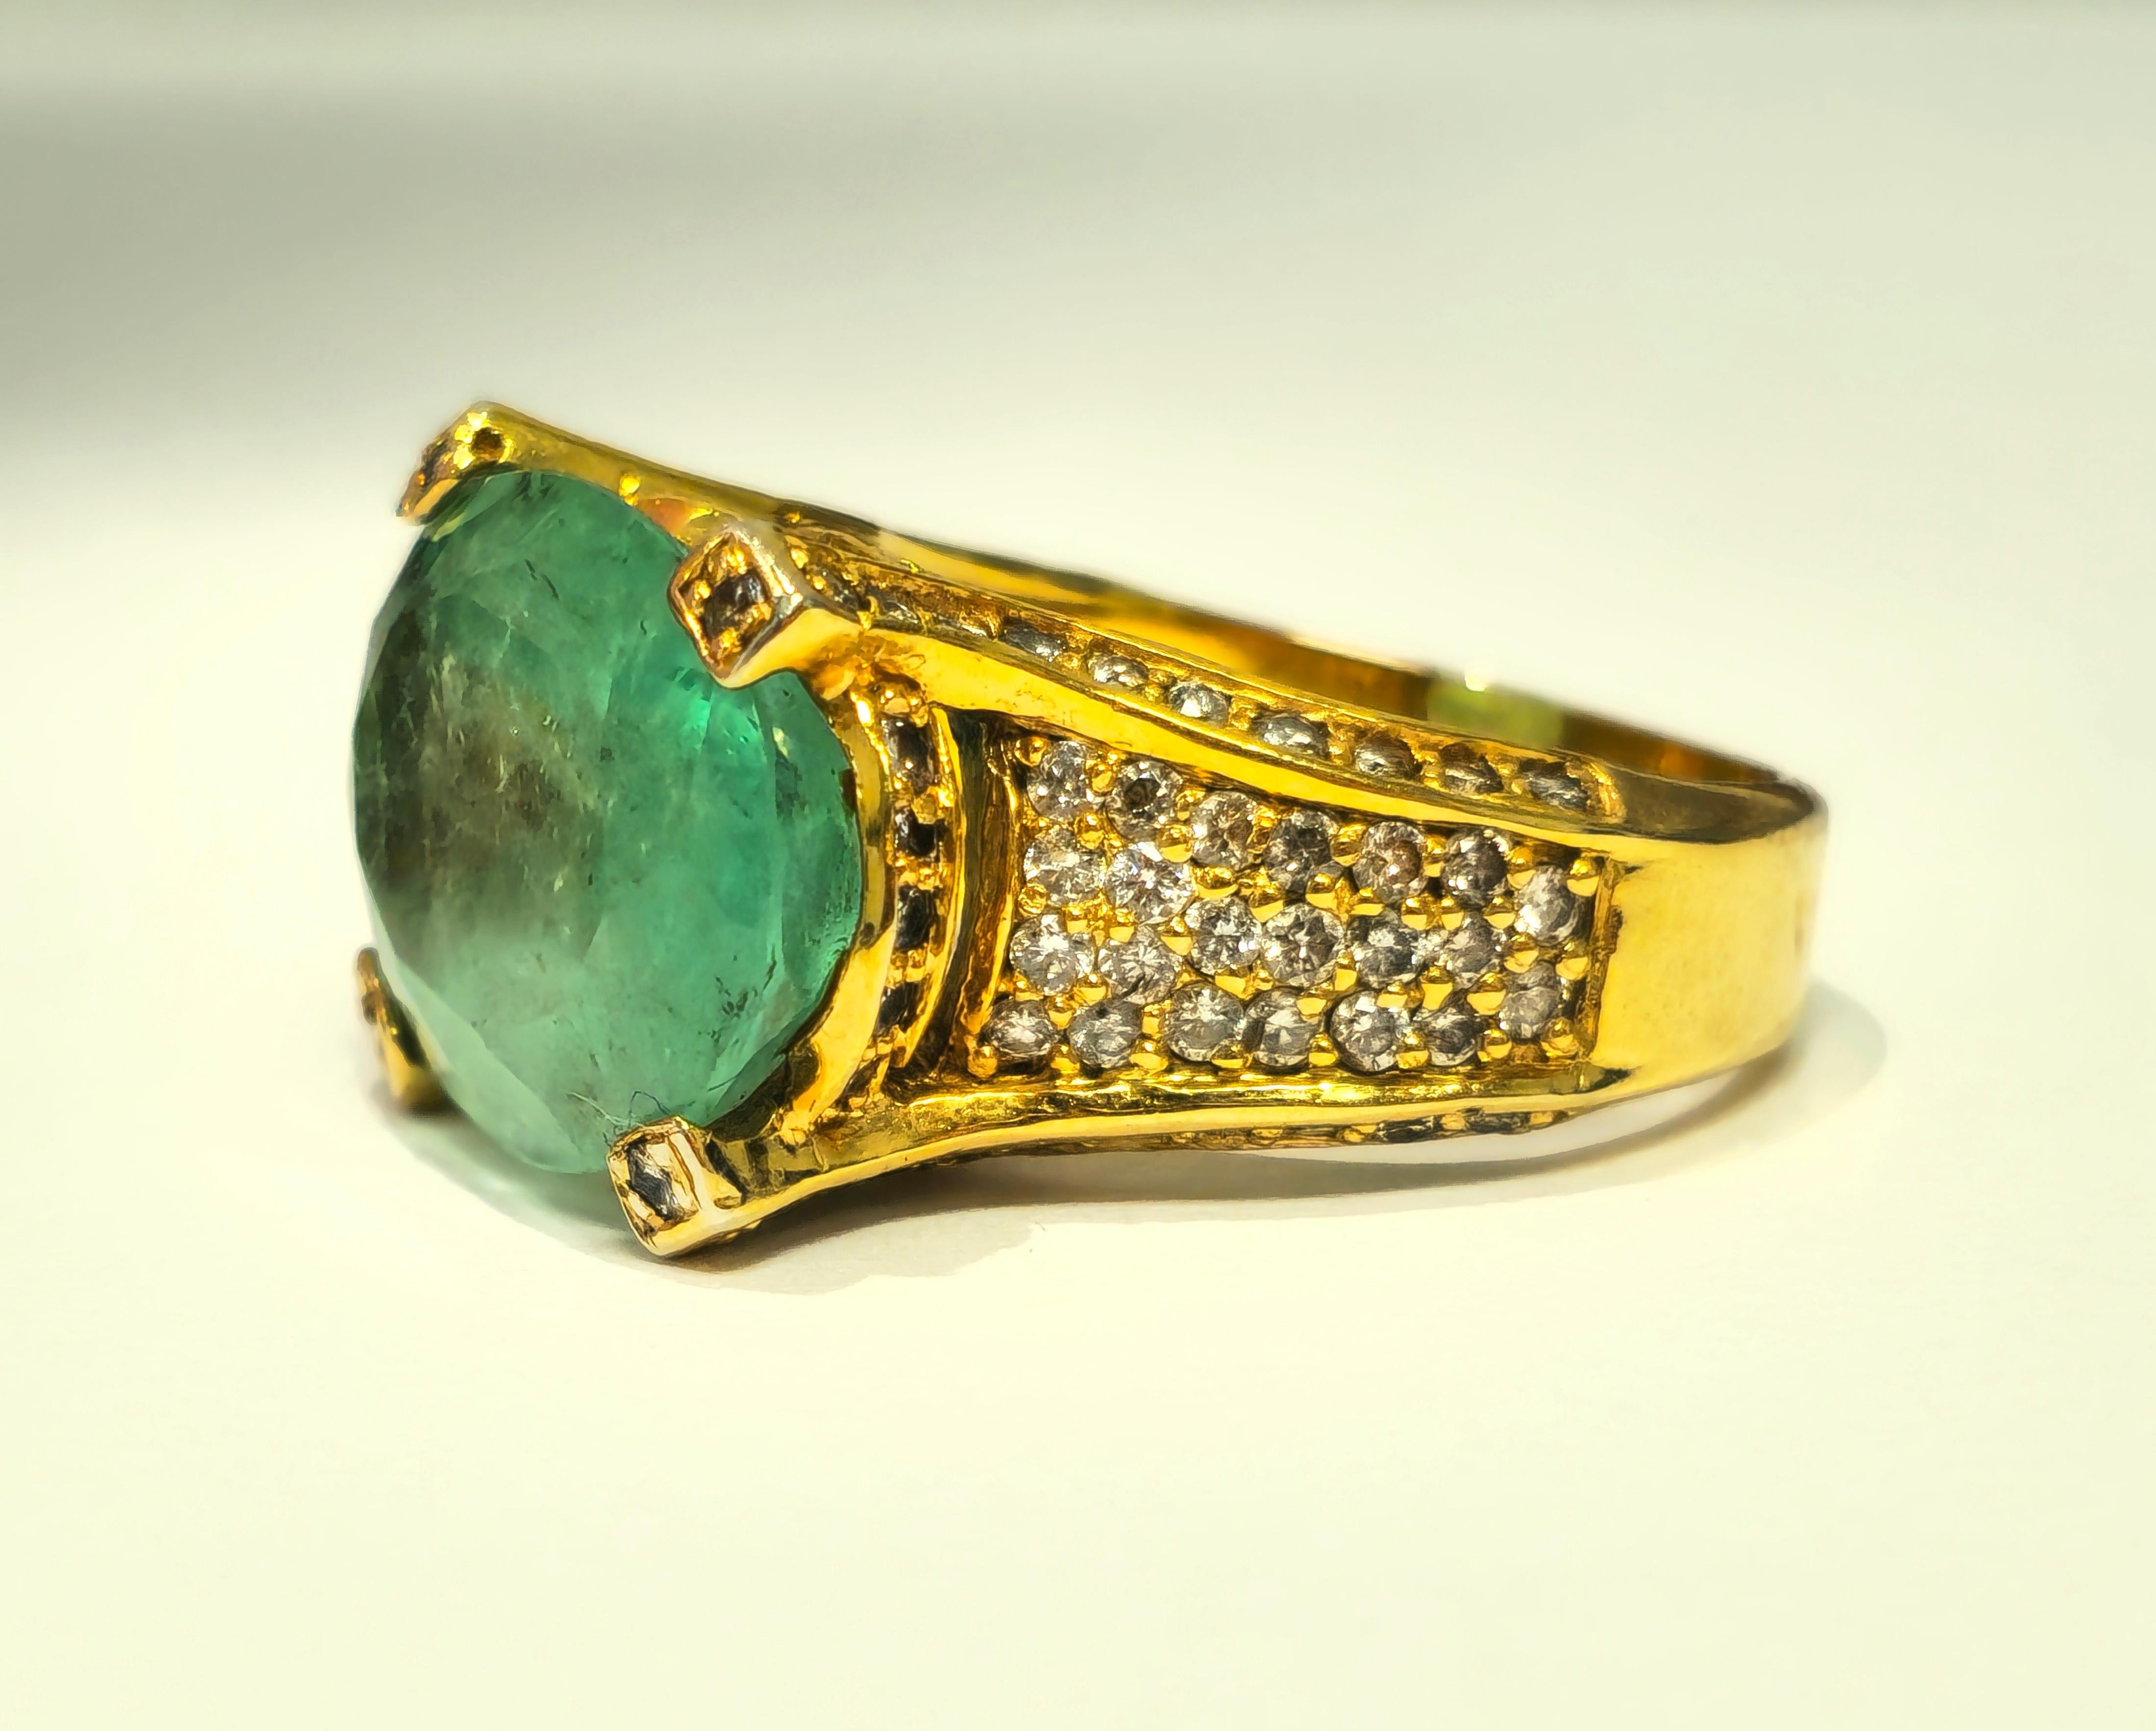 Vintage 11.50ct Colombian Emerald Diamond Ring in 14K In Excellent Condition For Sale In Miami, FL